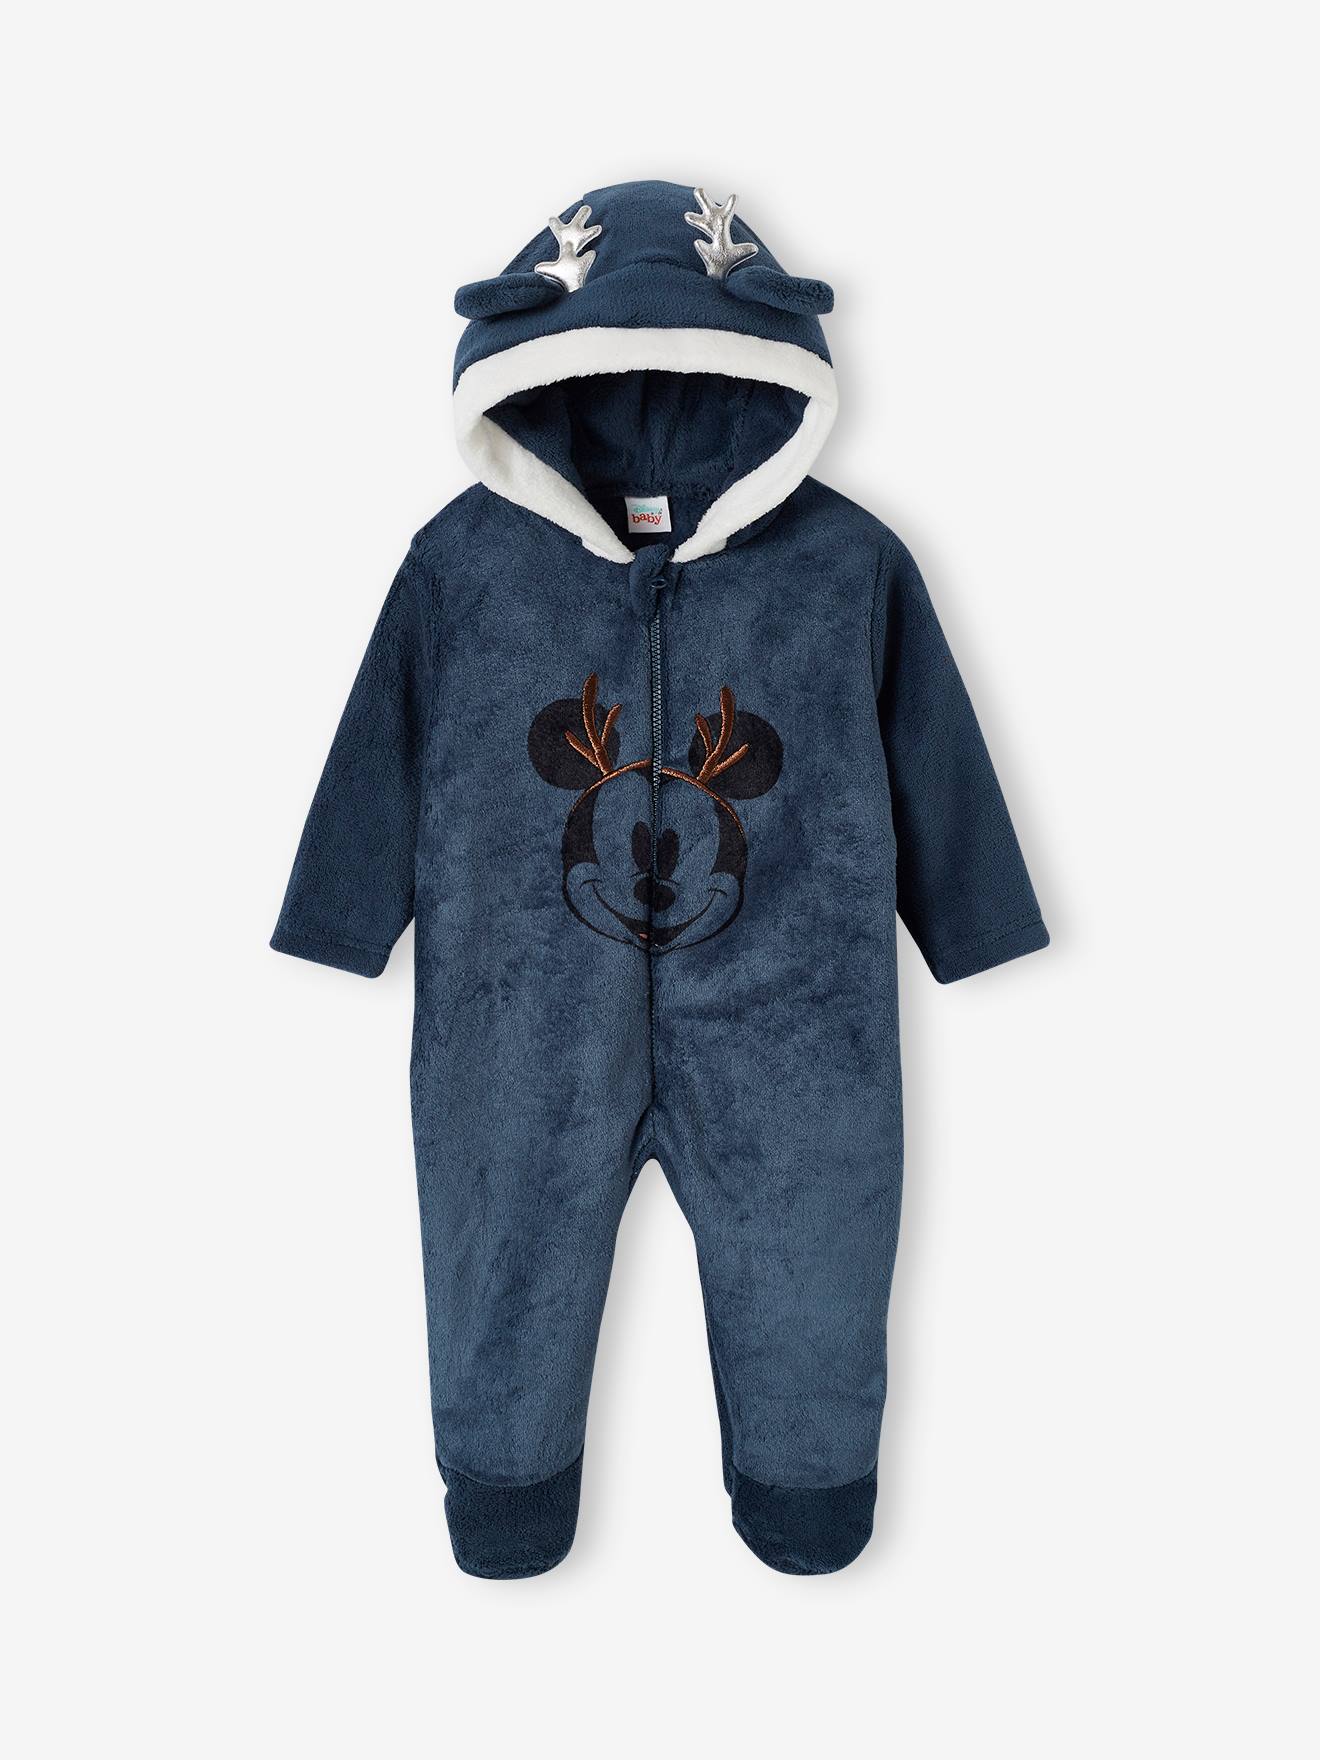 Christmas Special Disney(r) Mickey Mouse Onesie for Baby Boys navy blue